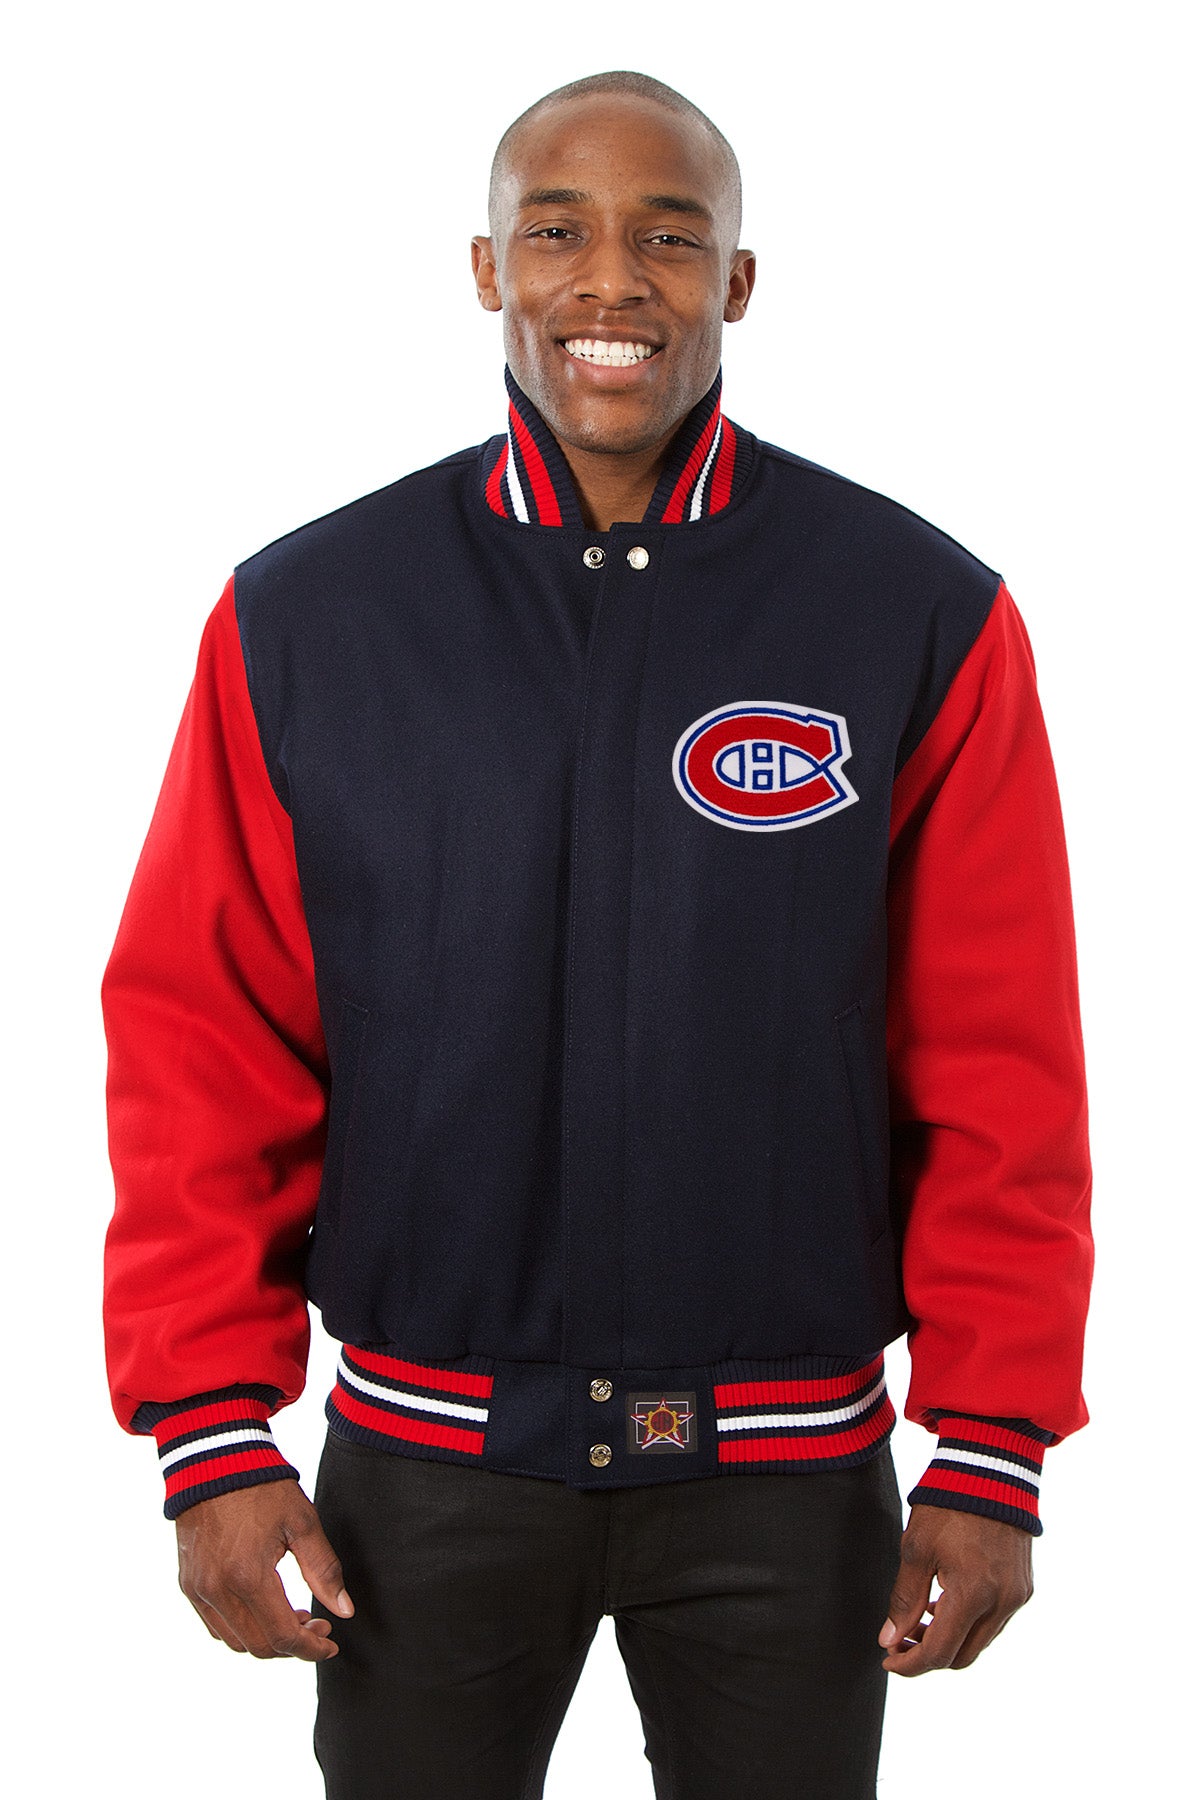 Montreal Canadiens Embroidered Wool Jacket - Navy/Red | J.H. Sports Jackets